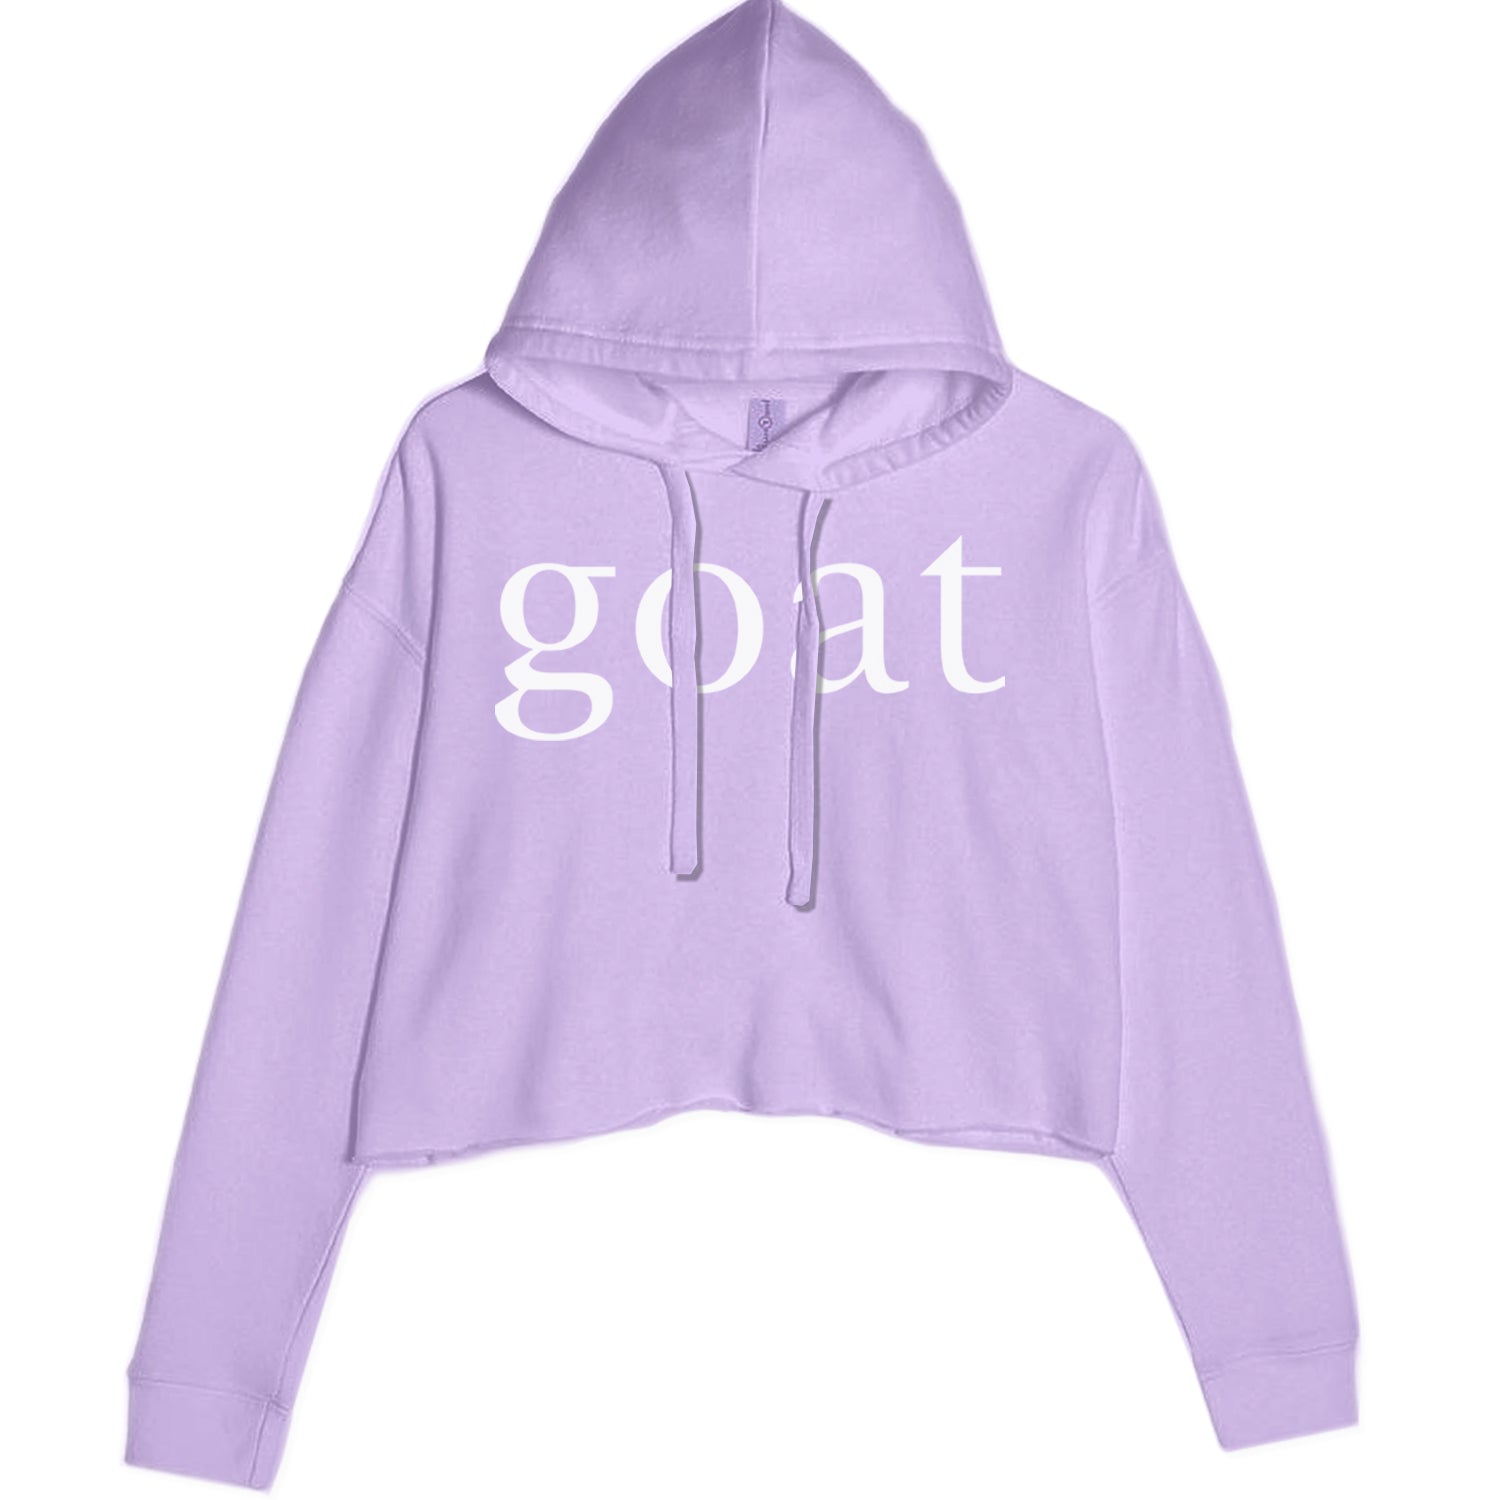 GOAT - Greatest Of All Time  Cropped Hoodie Sweatshirt Lavender